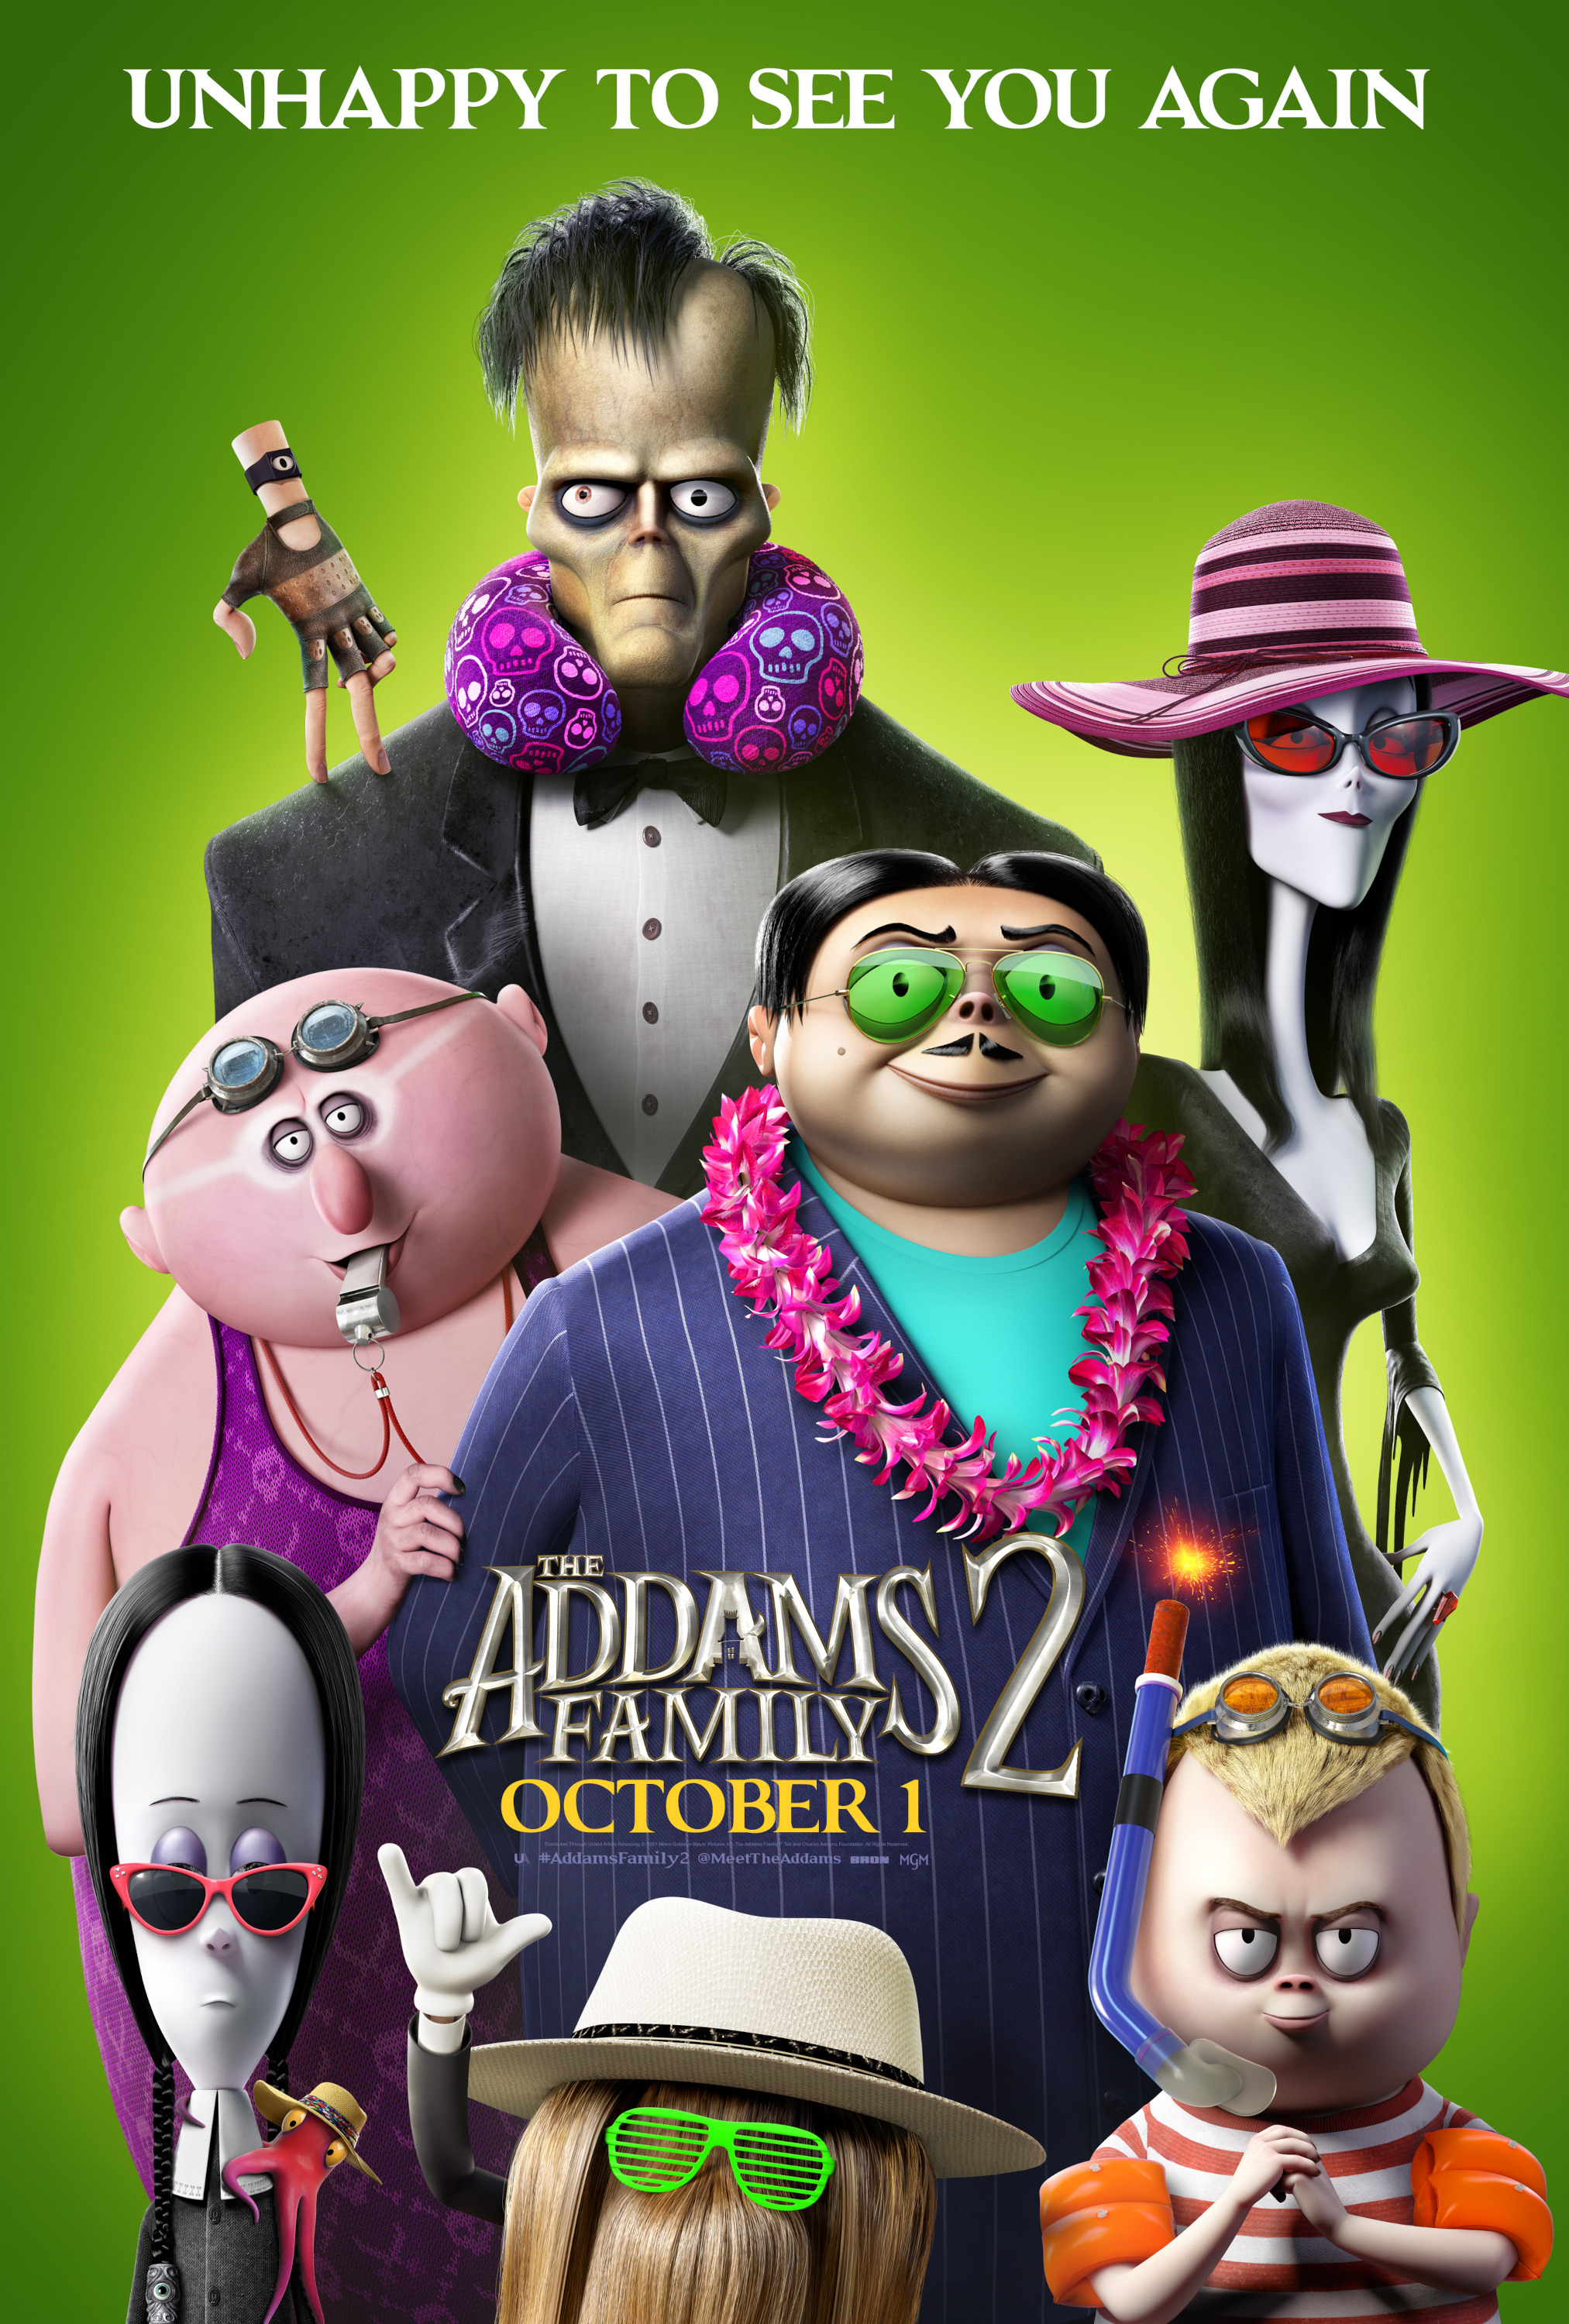 Mega Sized Movie Poster Image for The Addams Family 2 (#12 of 19)